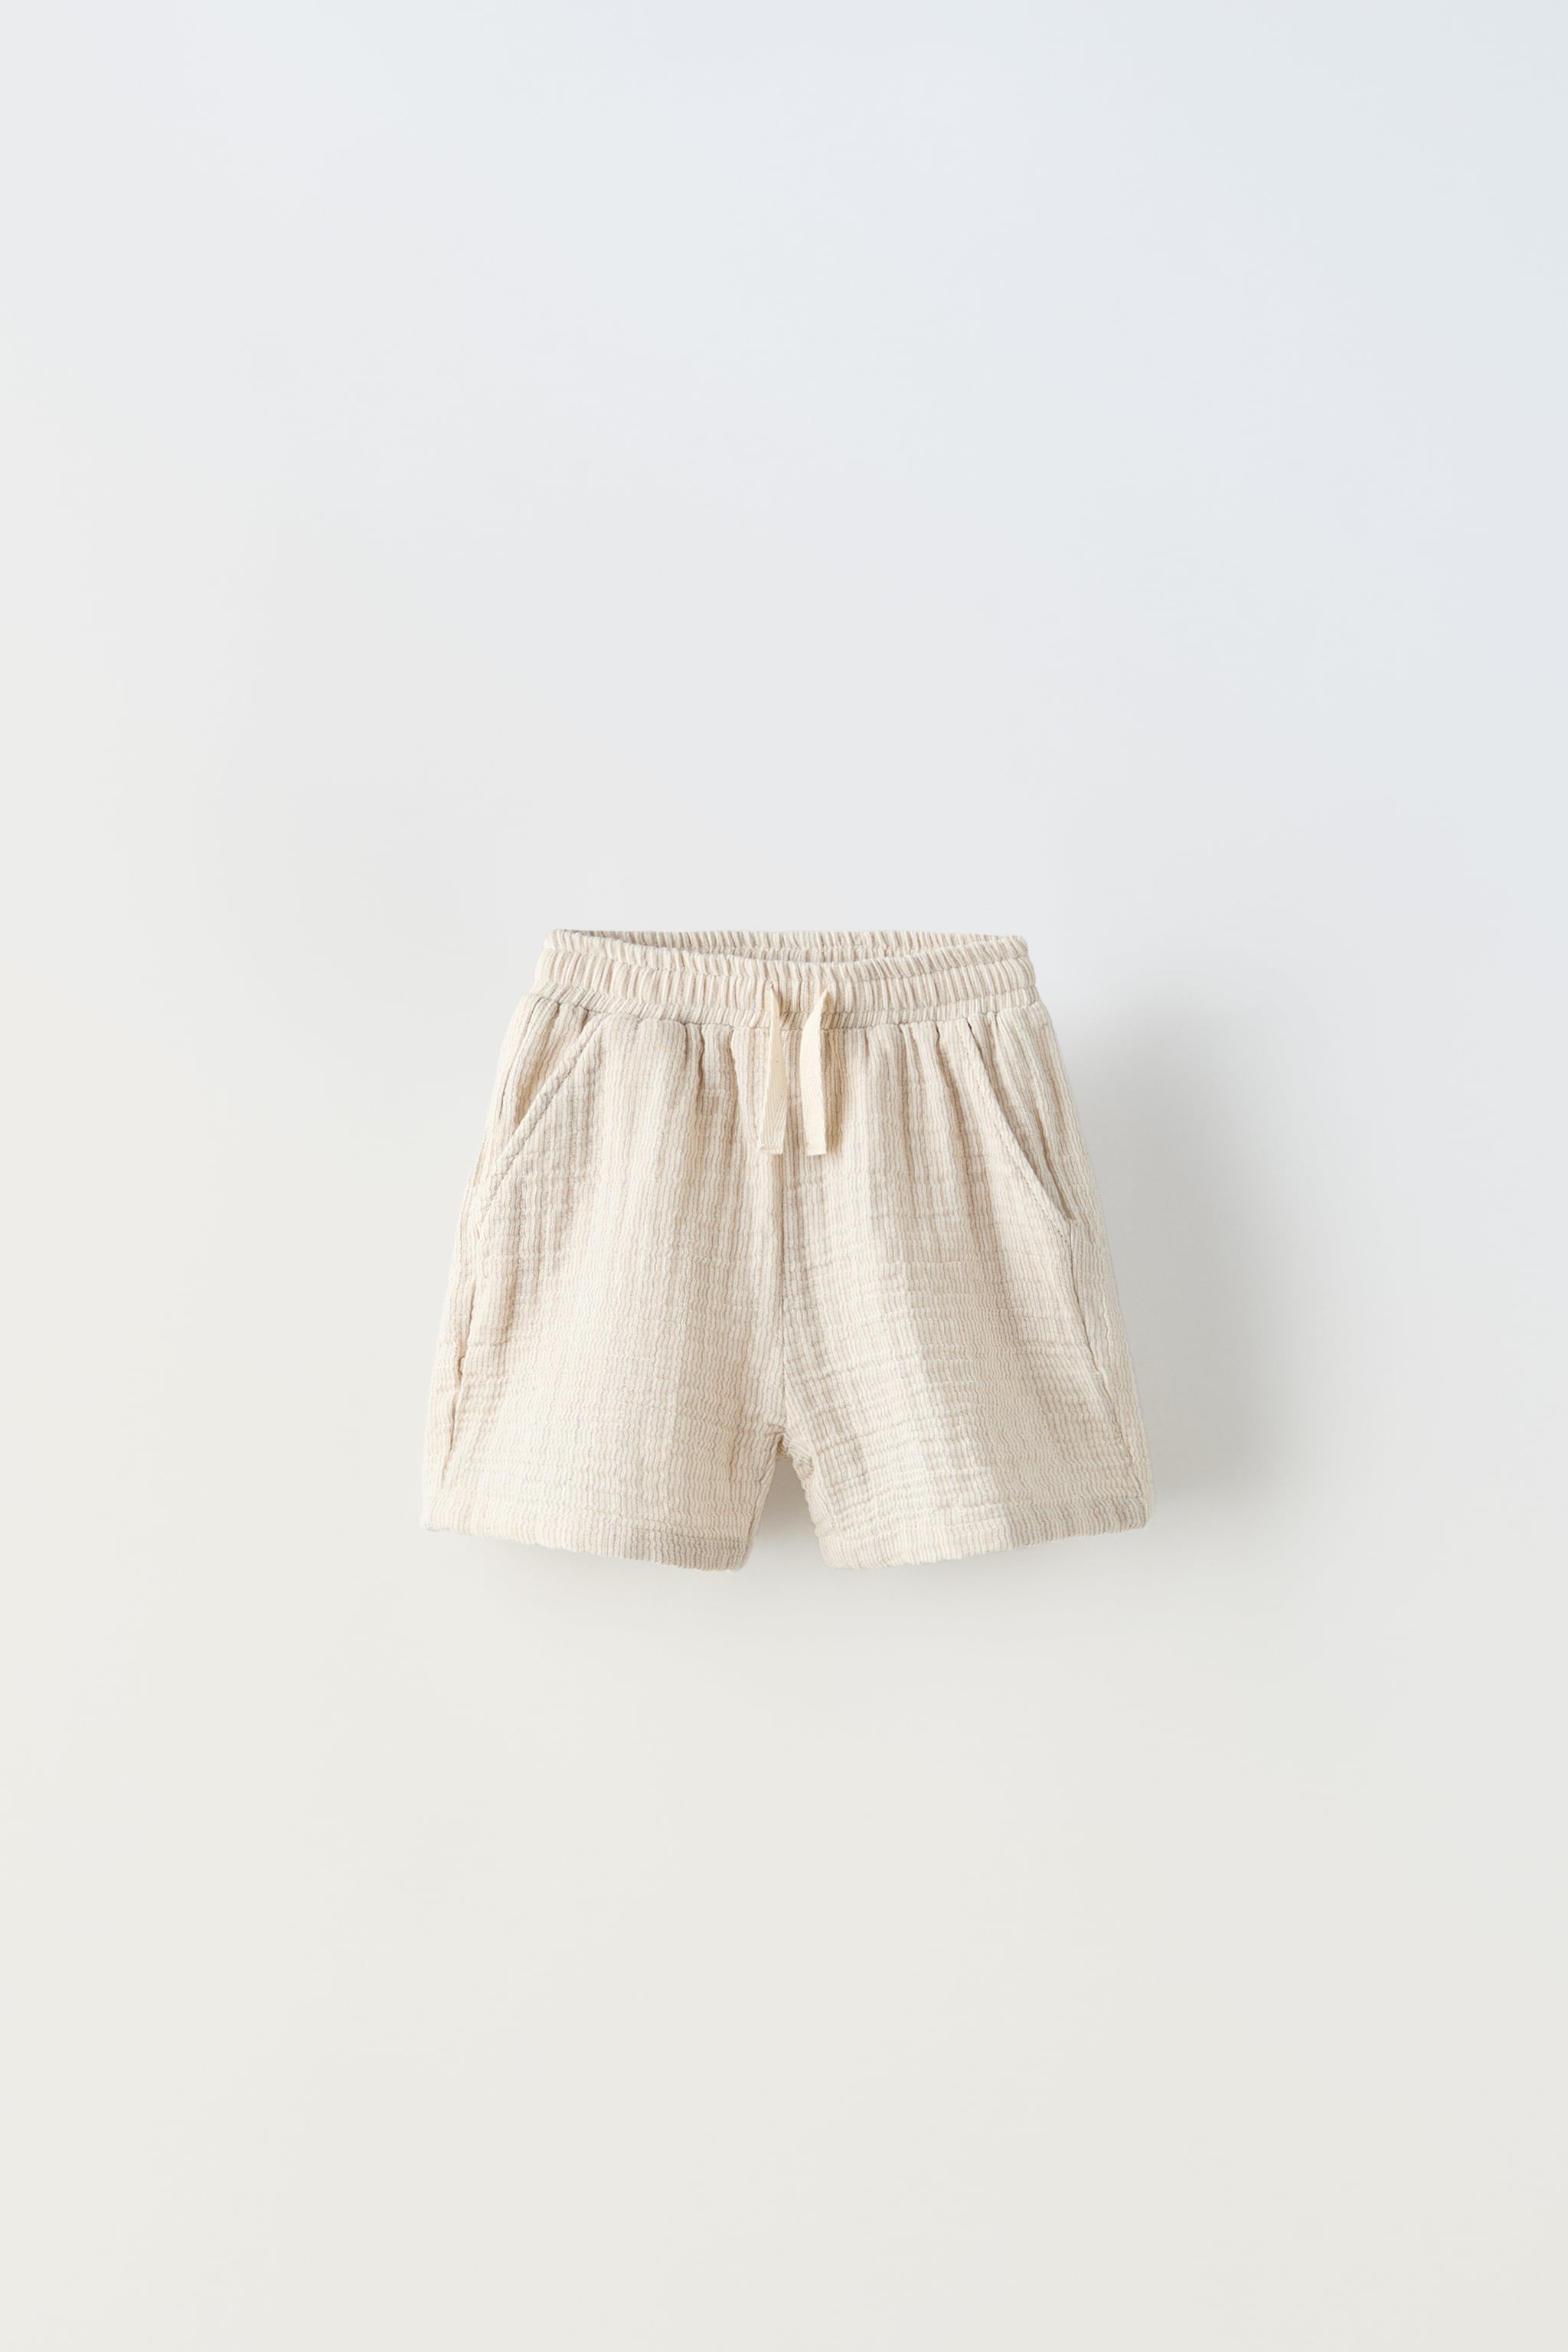 STRIPED TEXTURED SHORTS